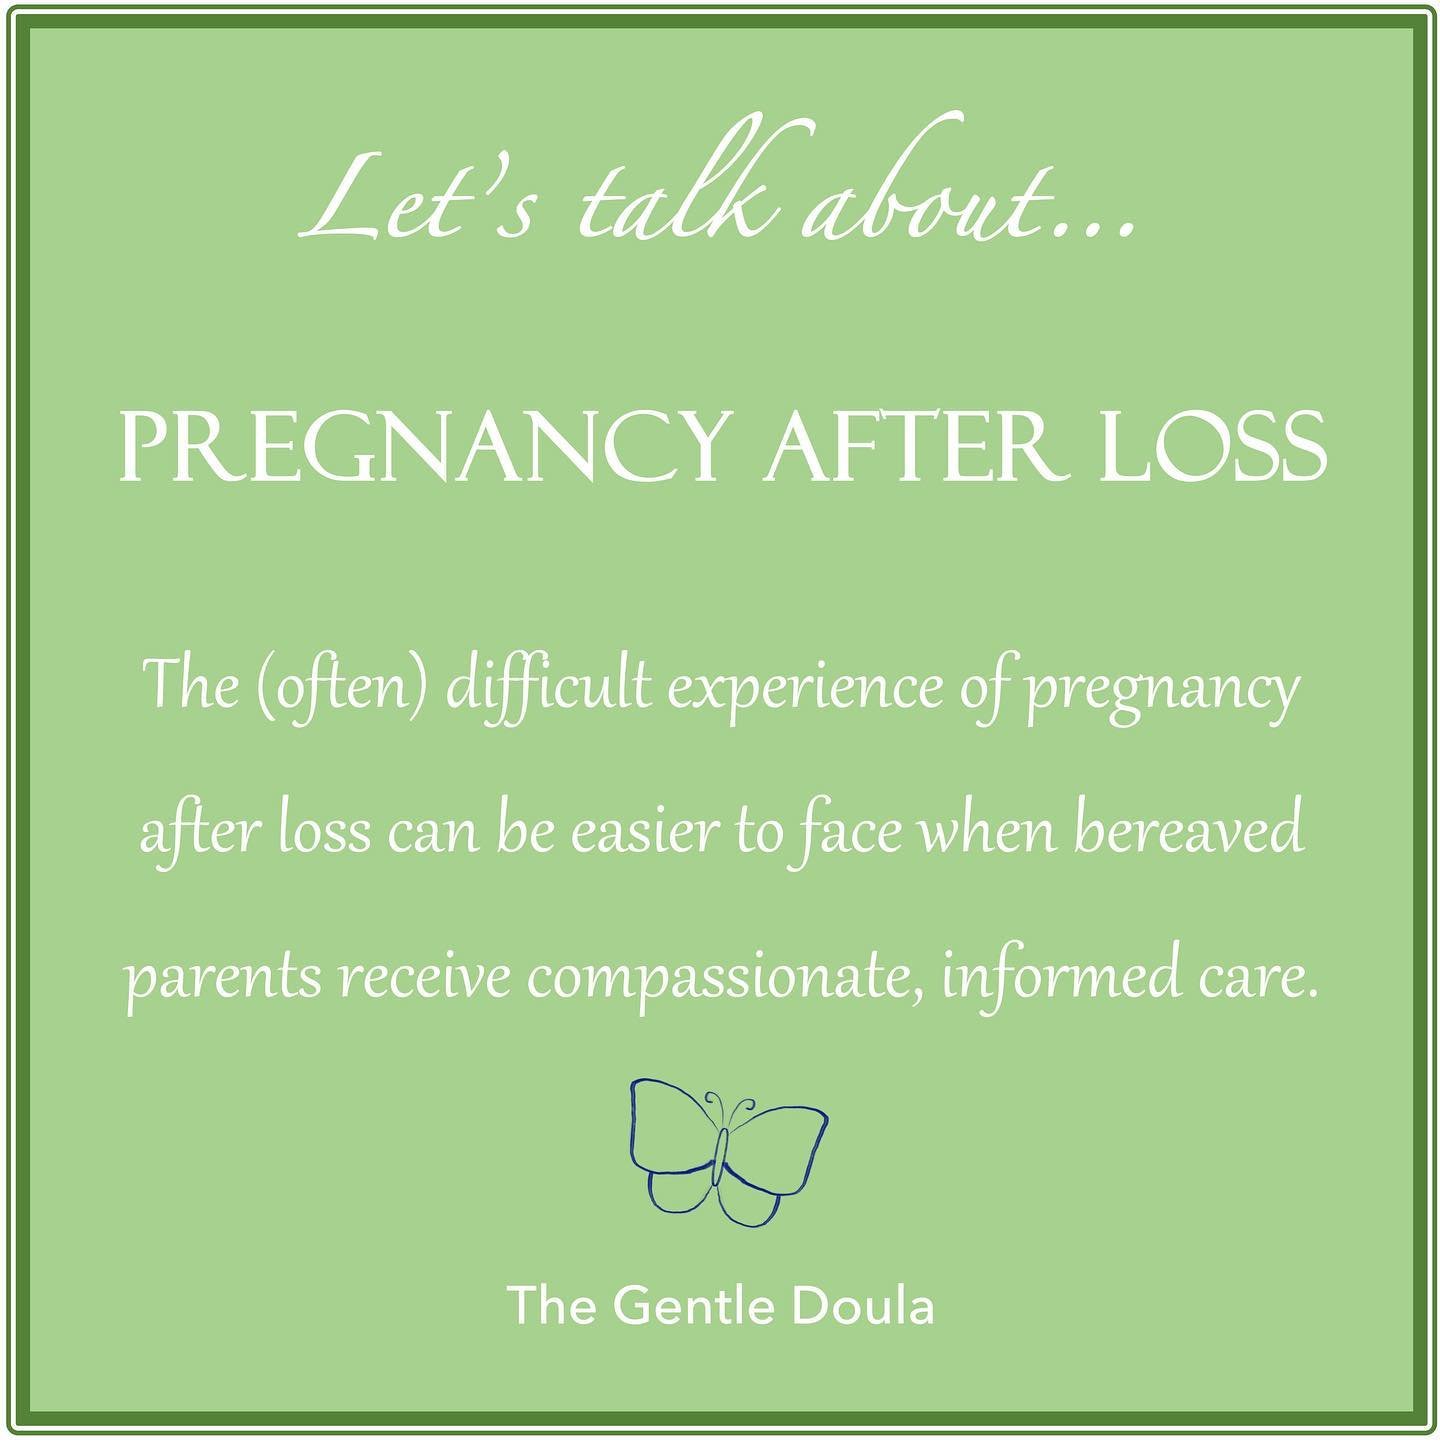 Today I want to talk about pregnancy after loss. If you have walked this journey, either personally or through someone close to you, then you know that one of the most difficult decisions a parent can make after experiencing perinatal loss is whether